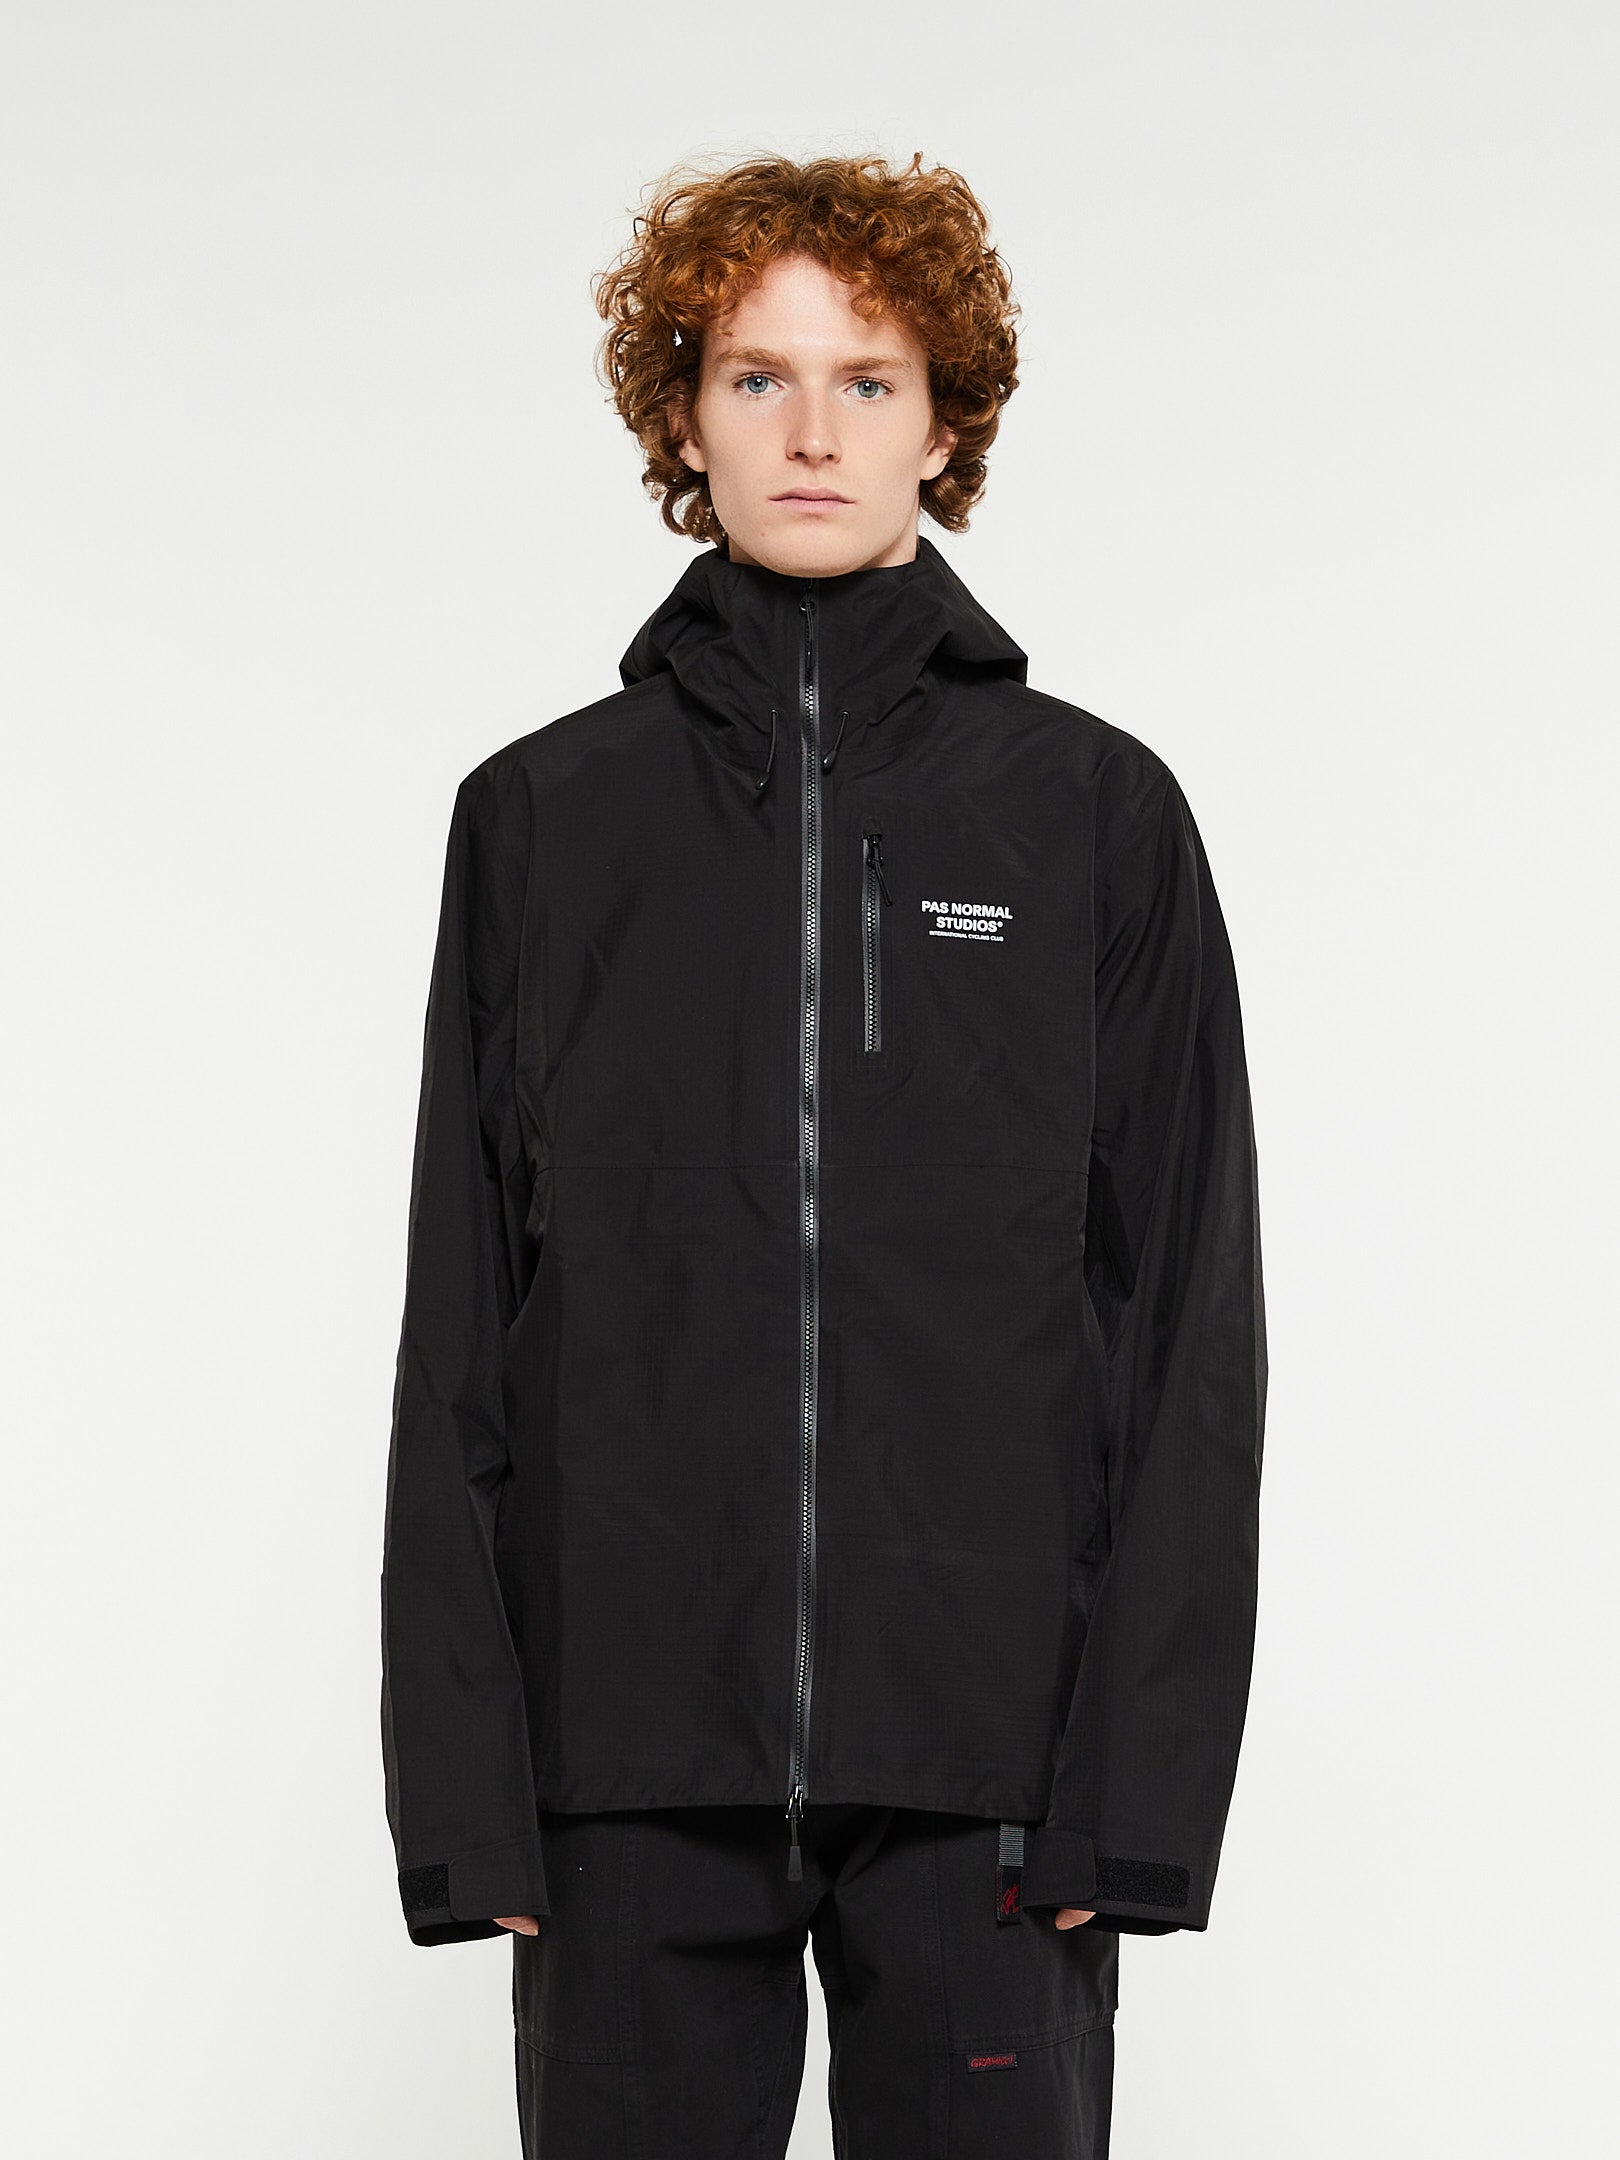 Pas Normal Studios - Off-Race Shell Jacket in Black – stoy